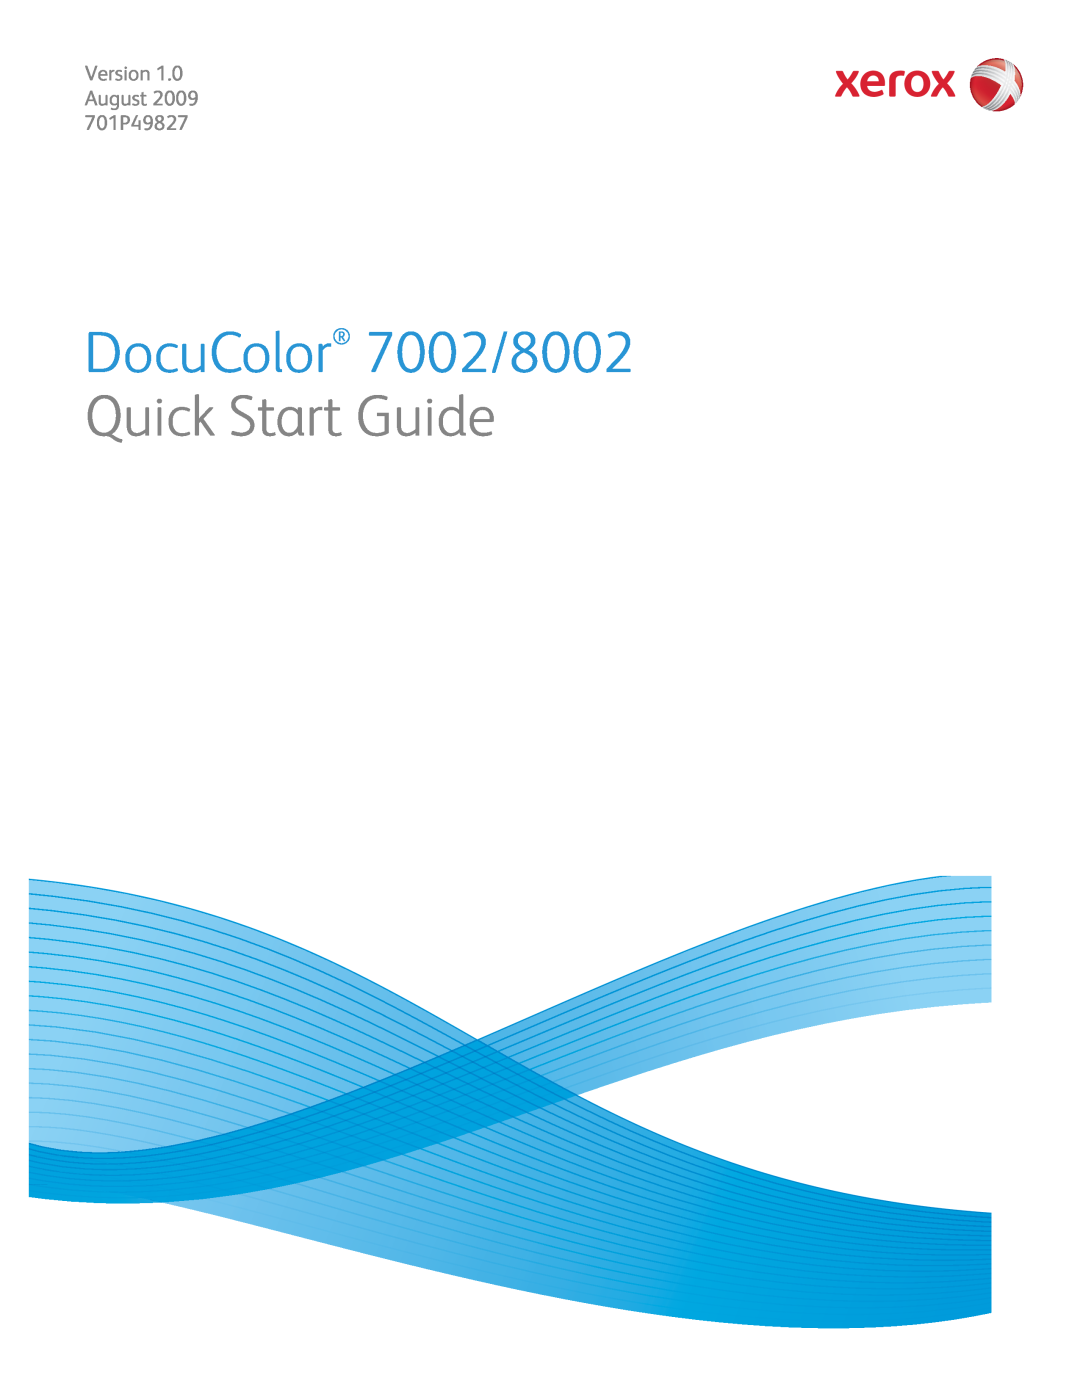 Xerox manual DocuColor 7002/8002, Quick Start Guide, Version 1.0 August 2009 701P49827 